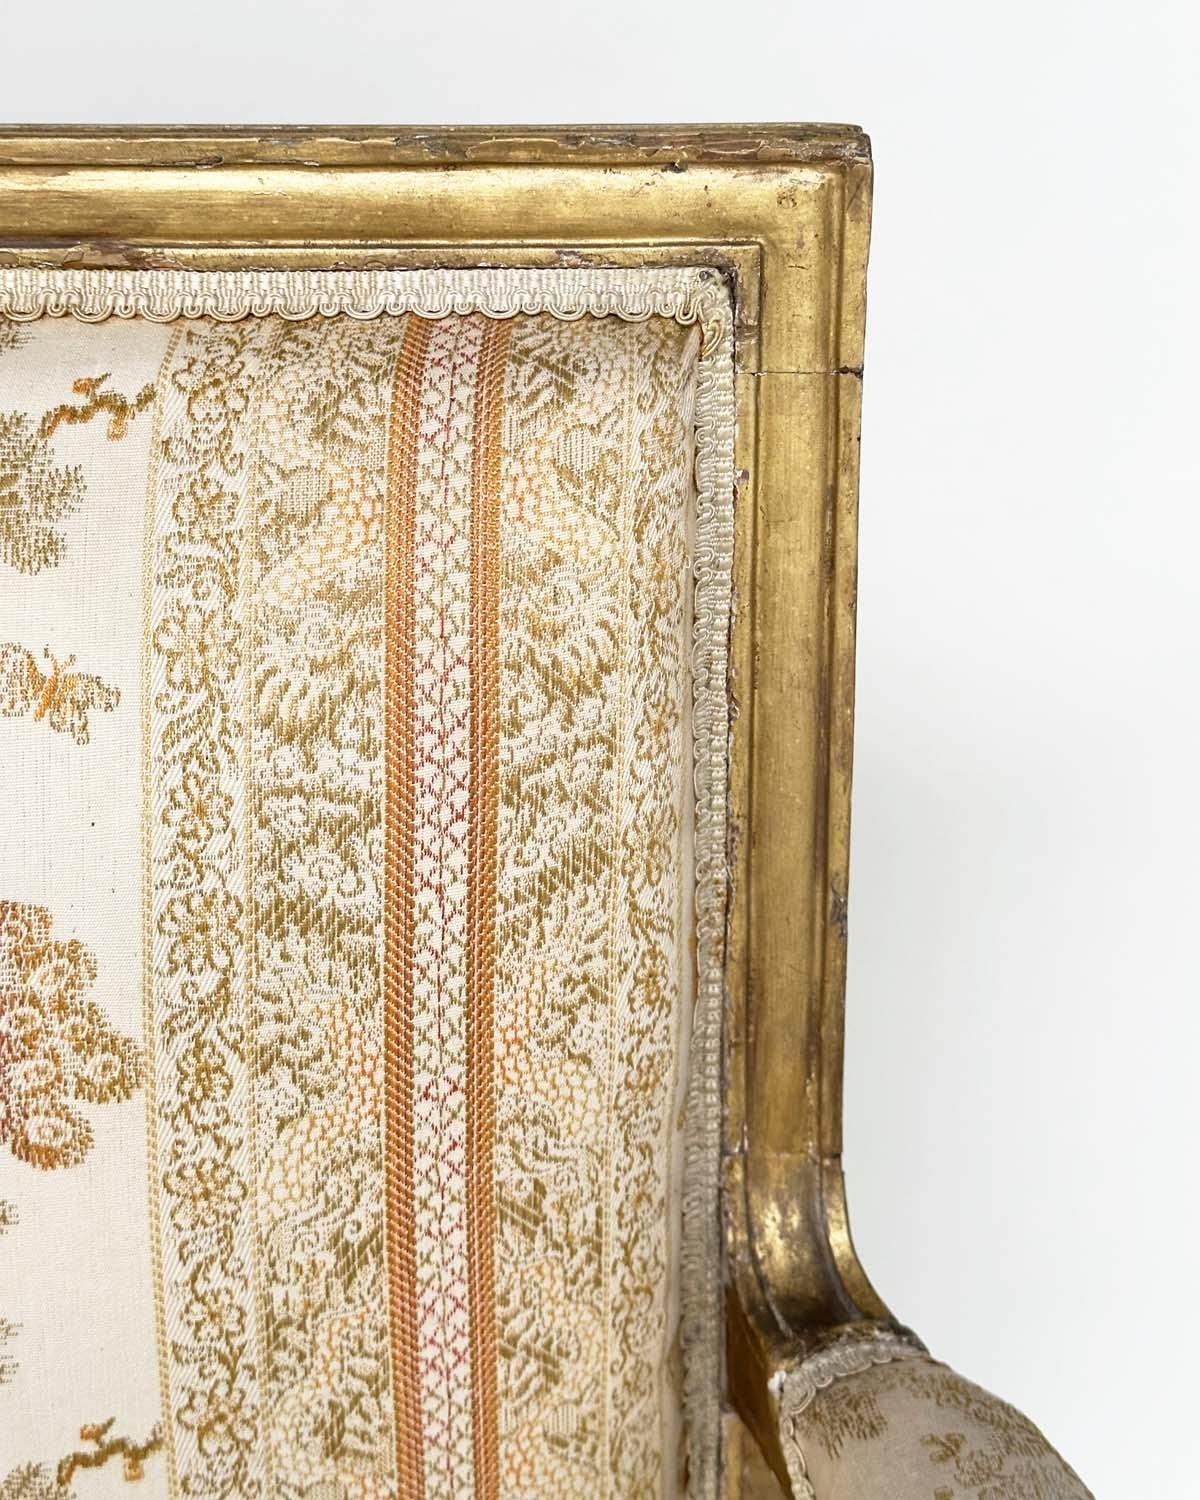 FAUTEUILS, a pair, 19th century giltwood each with down swept arms and carved fluted supports, - Image 8 of 11